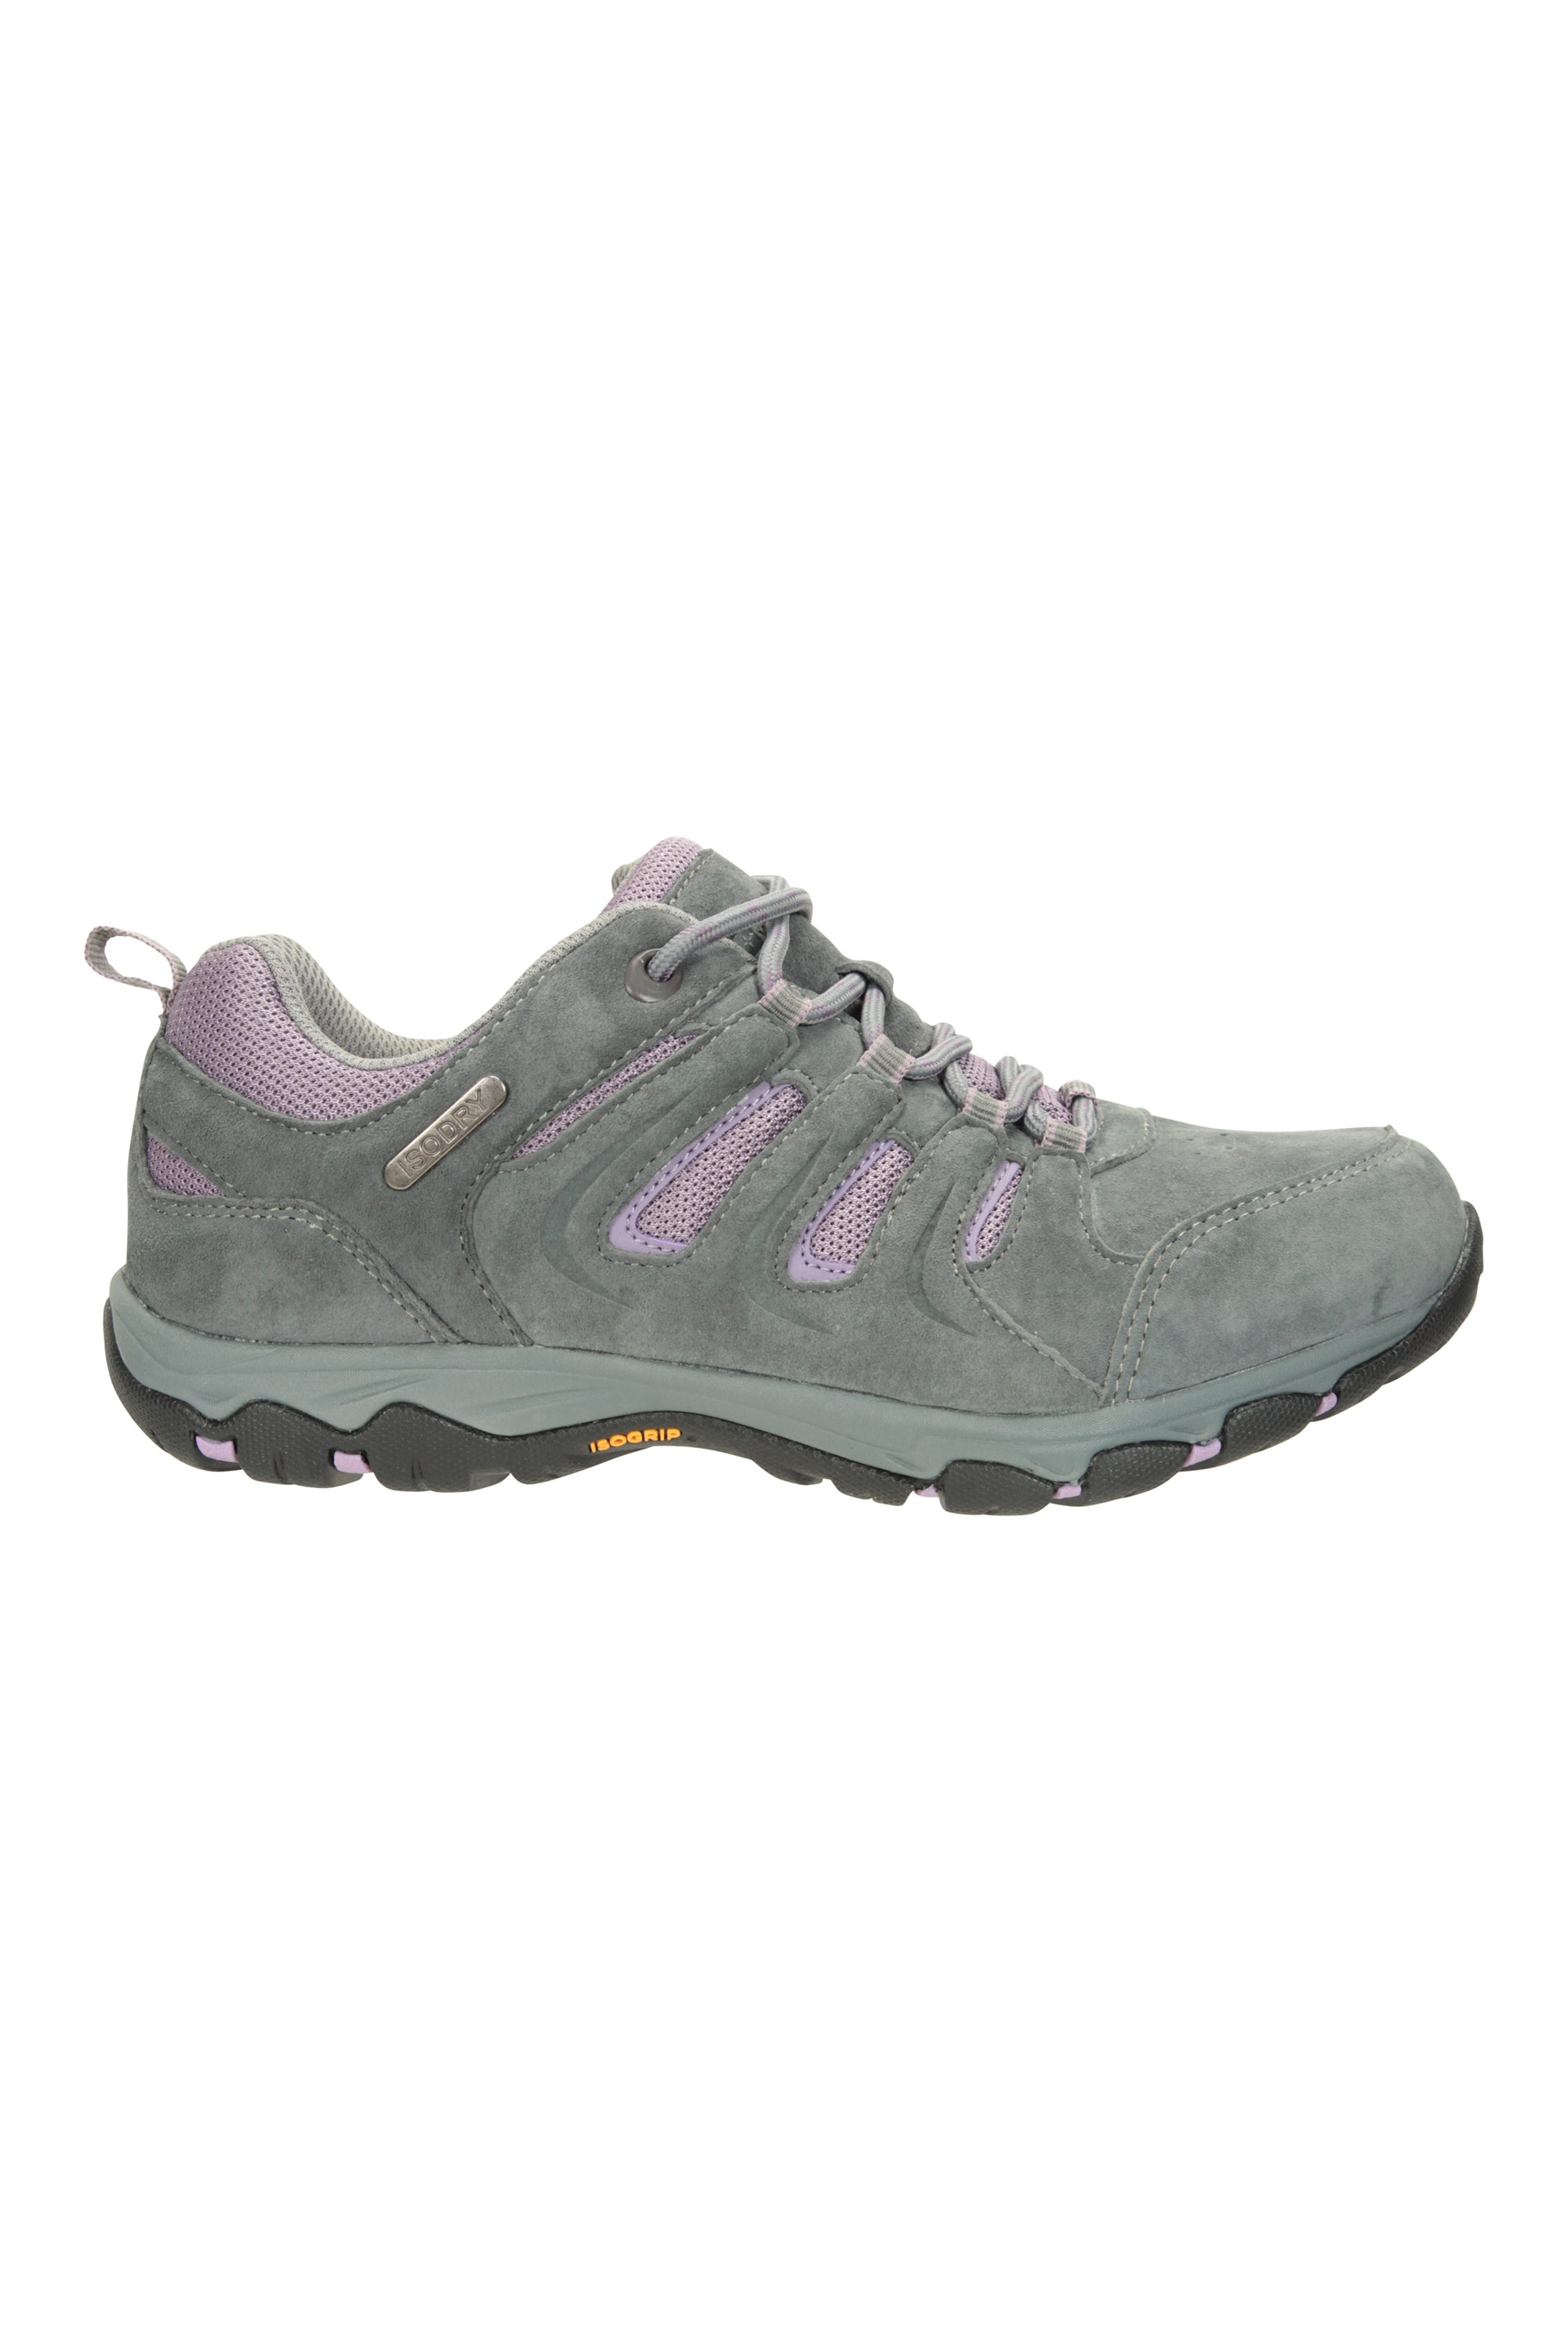 mountain warehouse isodry shoes